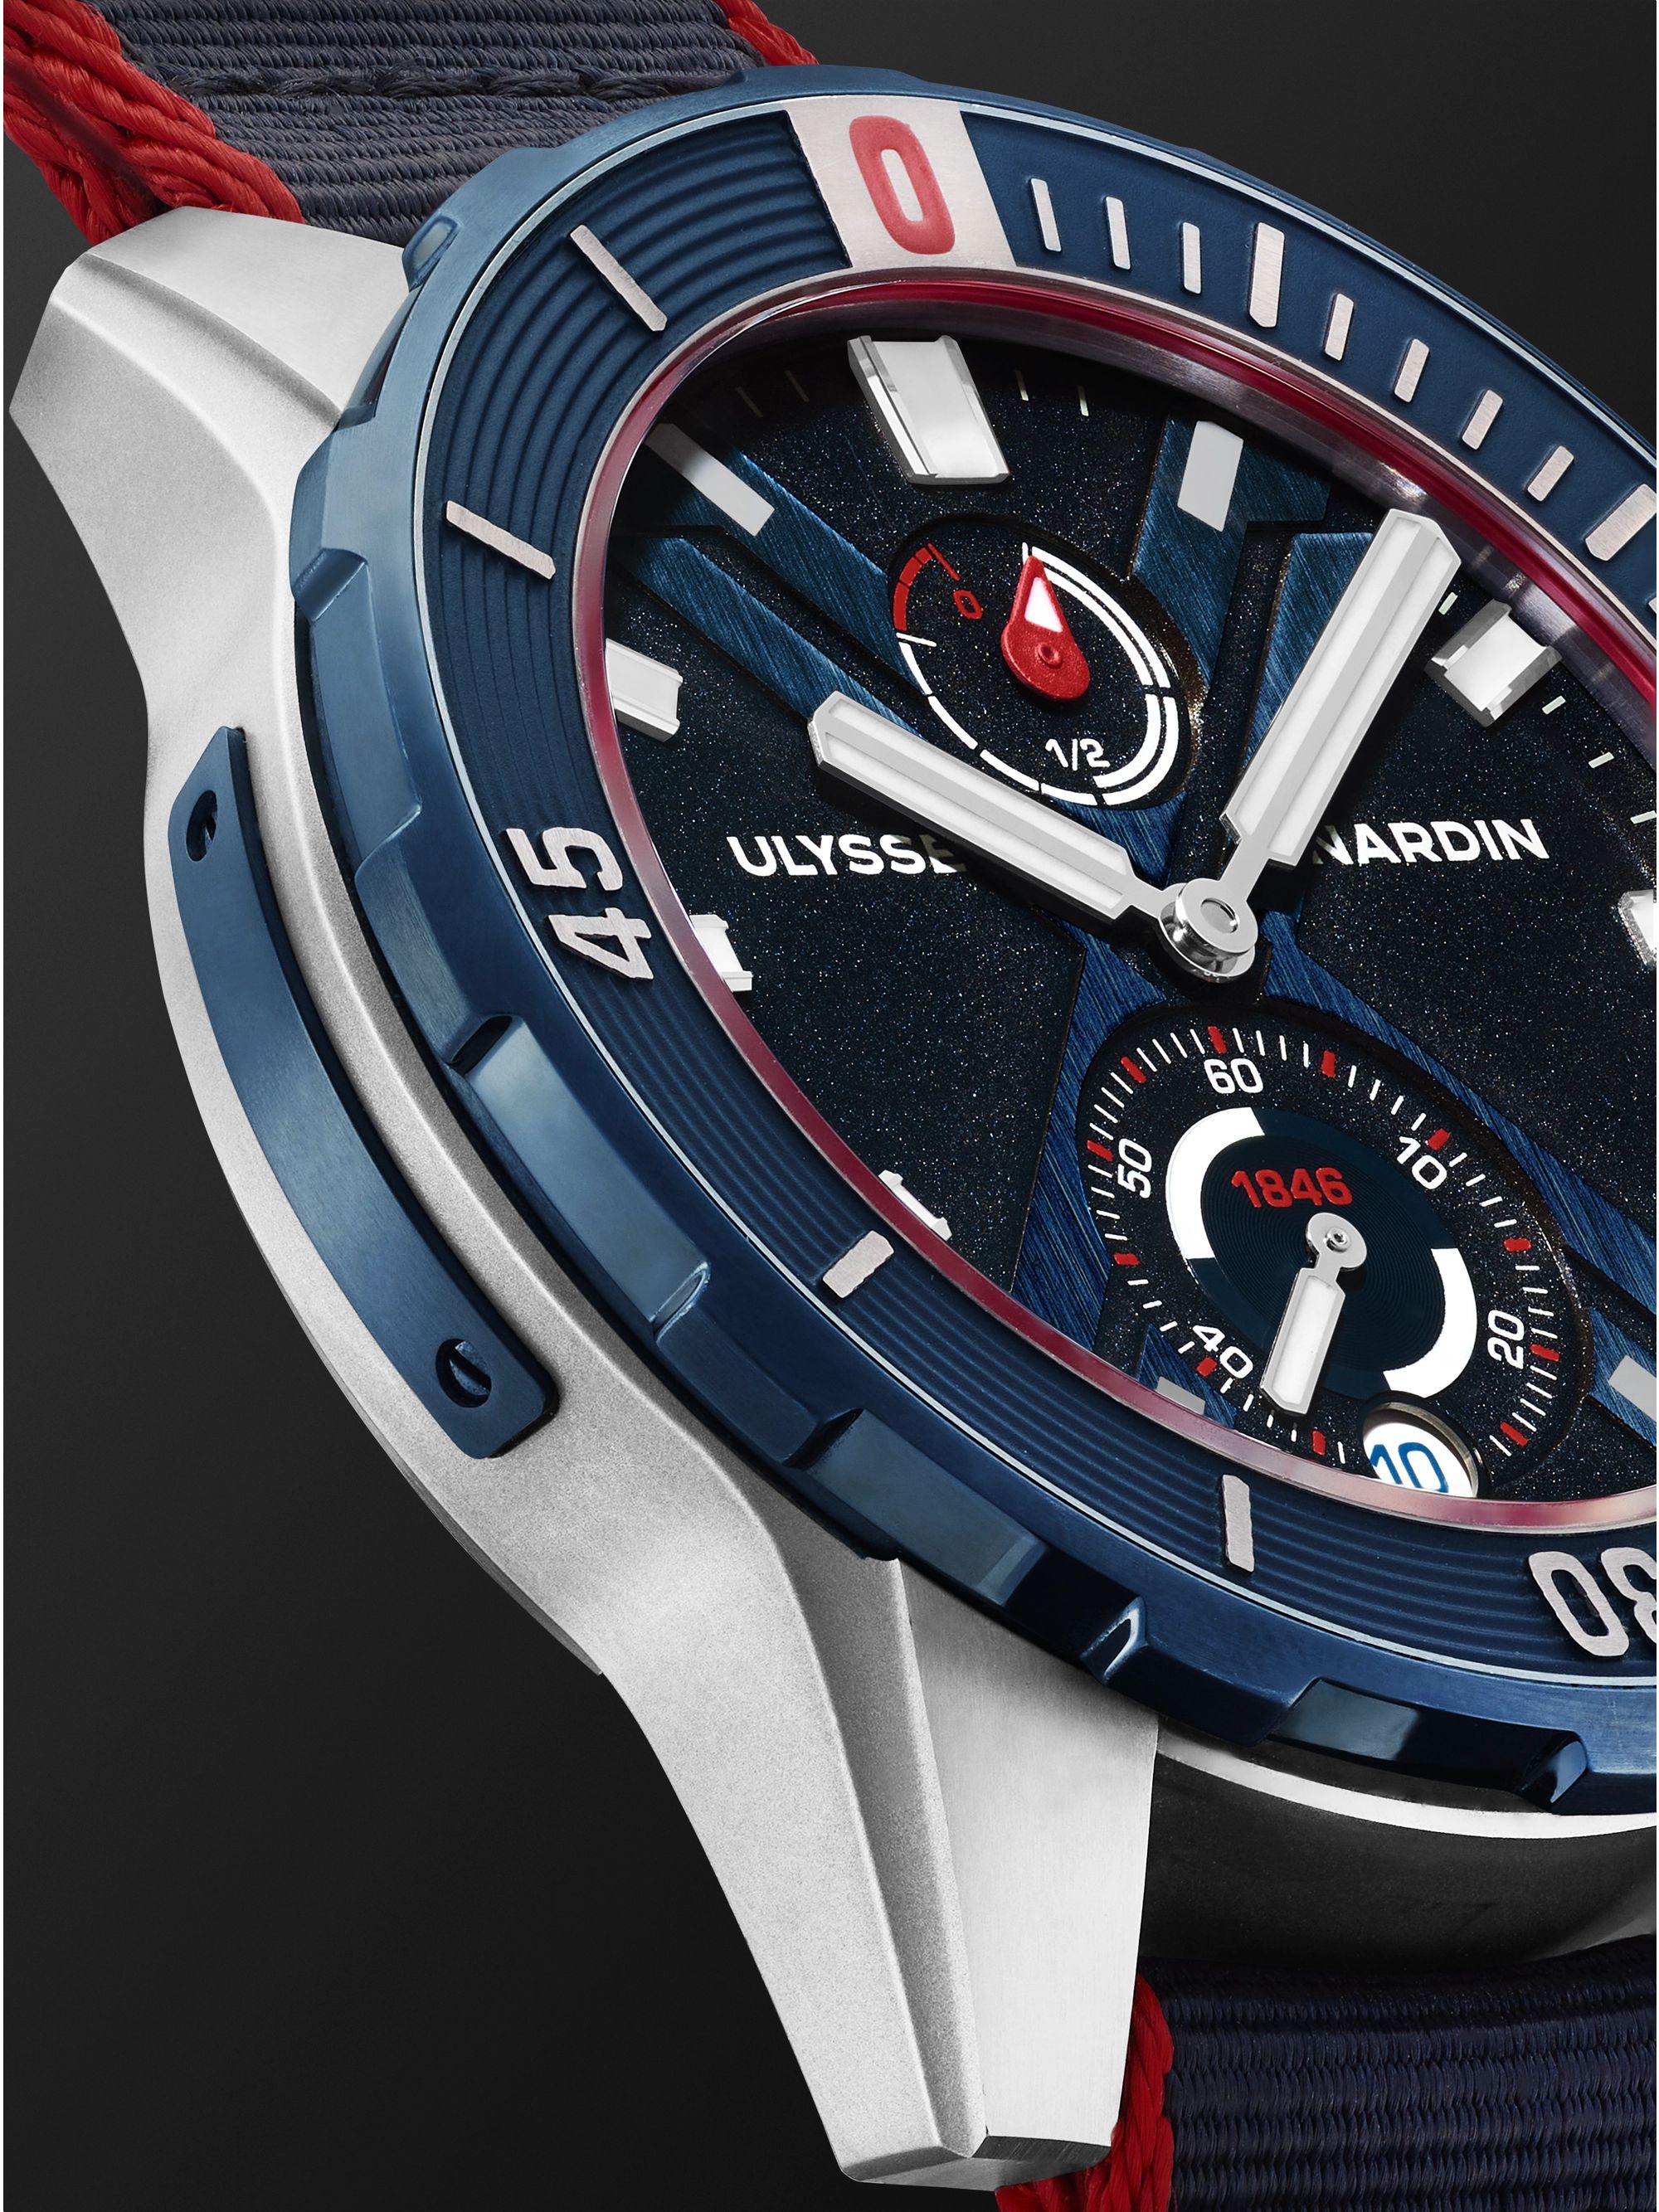 ULYSSE NARDIN Diver X Nemo Point Limited Edition Automatic 44mm Titanium and Webbing Watch, Ref. No. 1183-170LE/93-NEMO